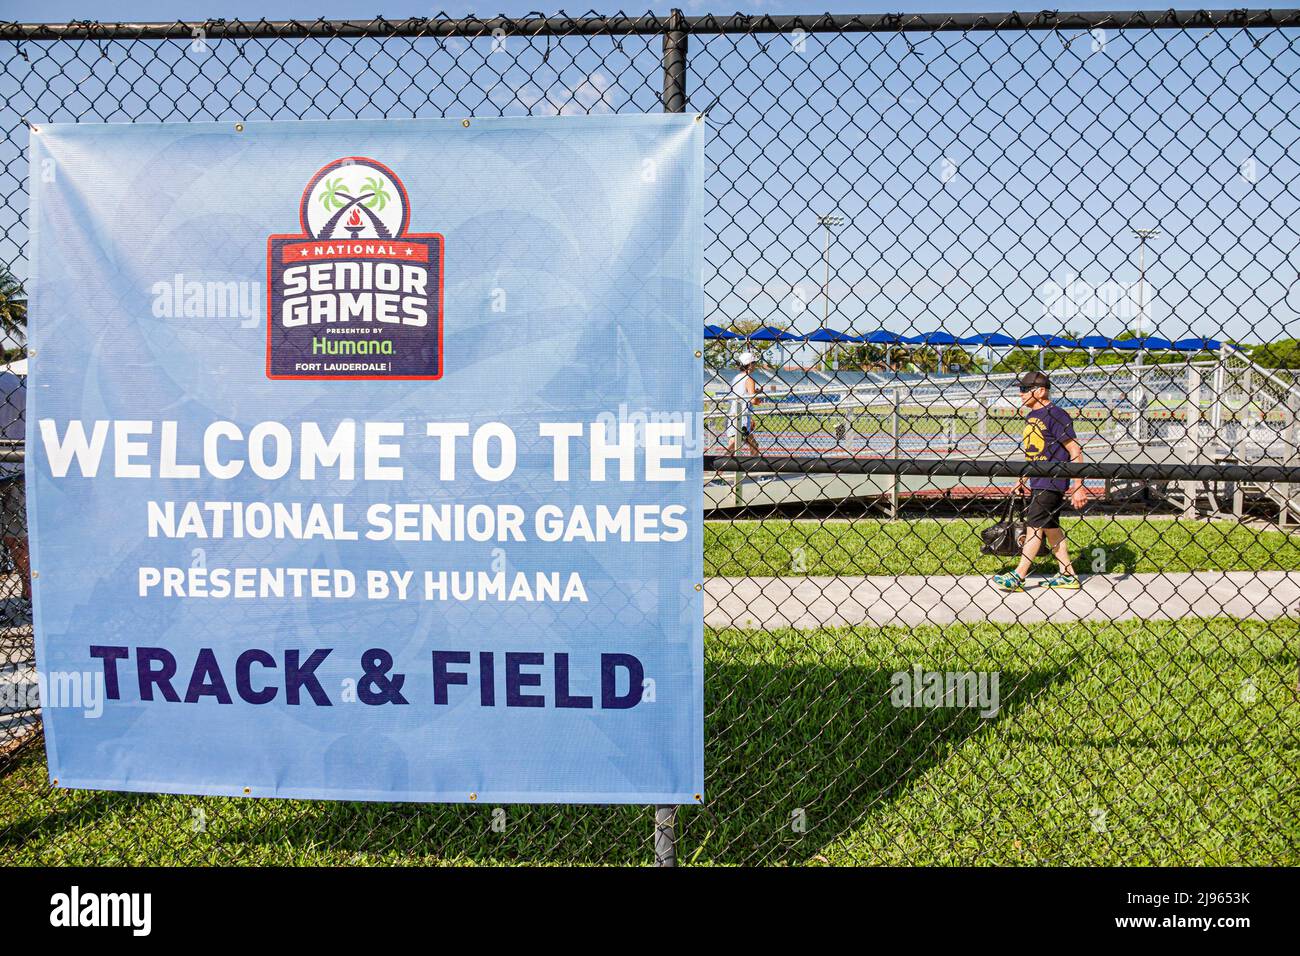 Fort Ft. Lauderdale Florida, Ansin Sports Complex Track & Field National Senior Games Stockfoto